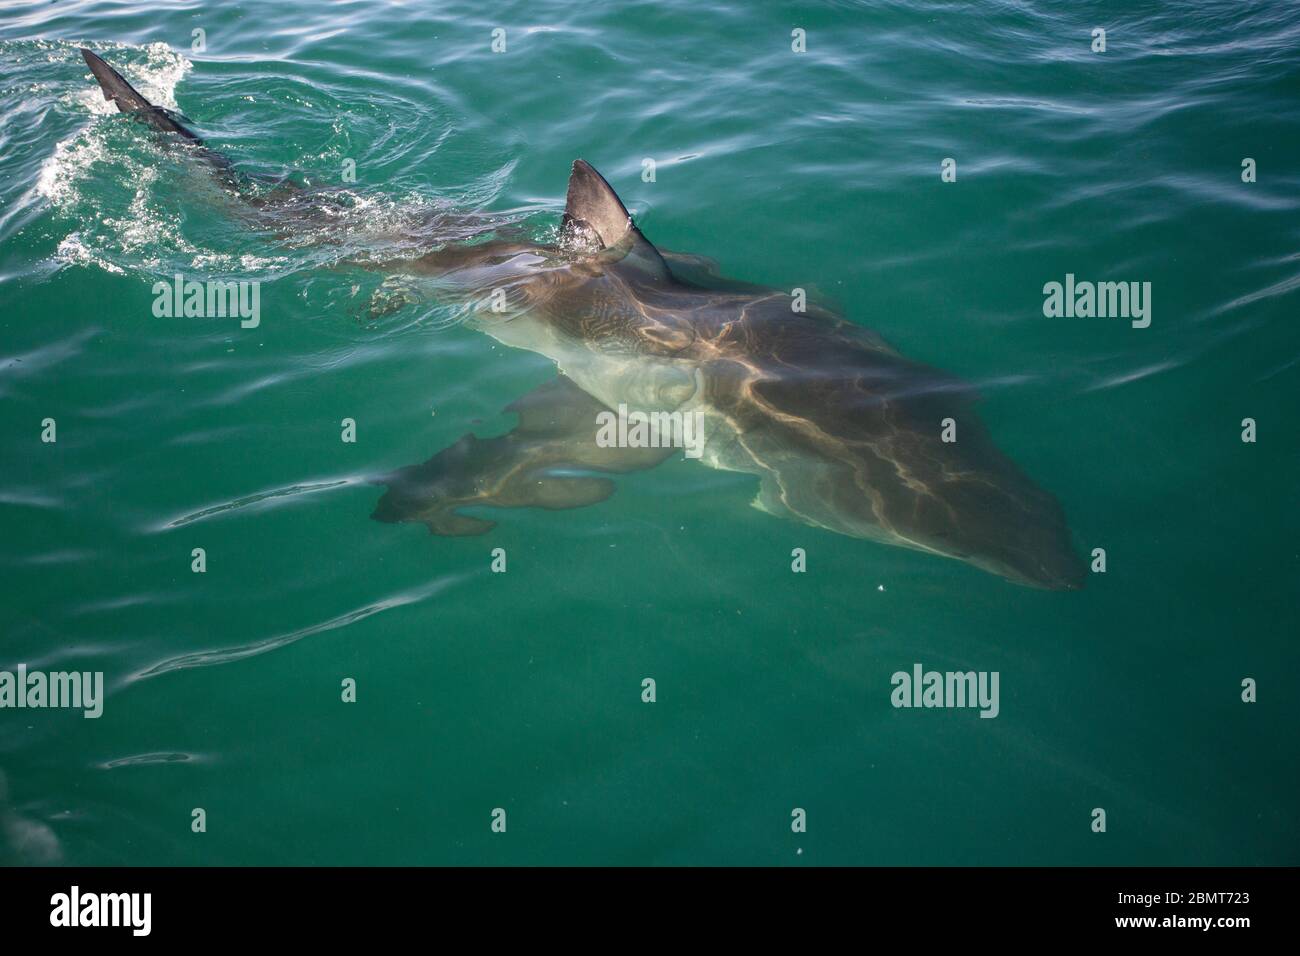 Great White Shark Cage Diving, False Bay, South Africa Stock Photo